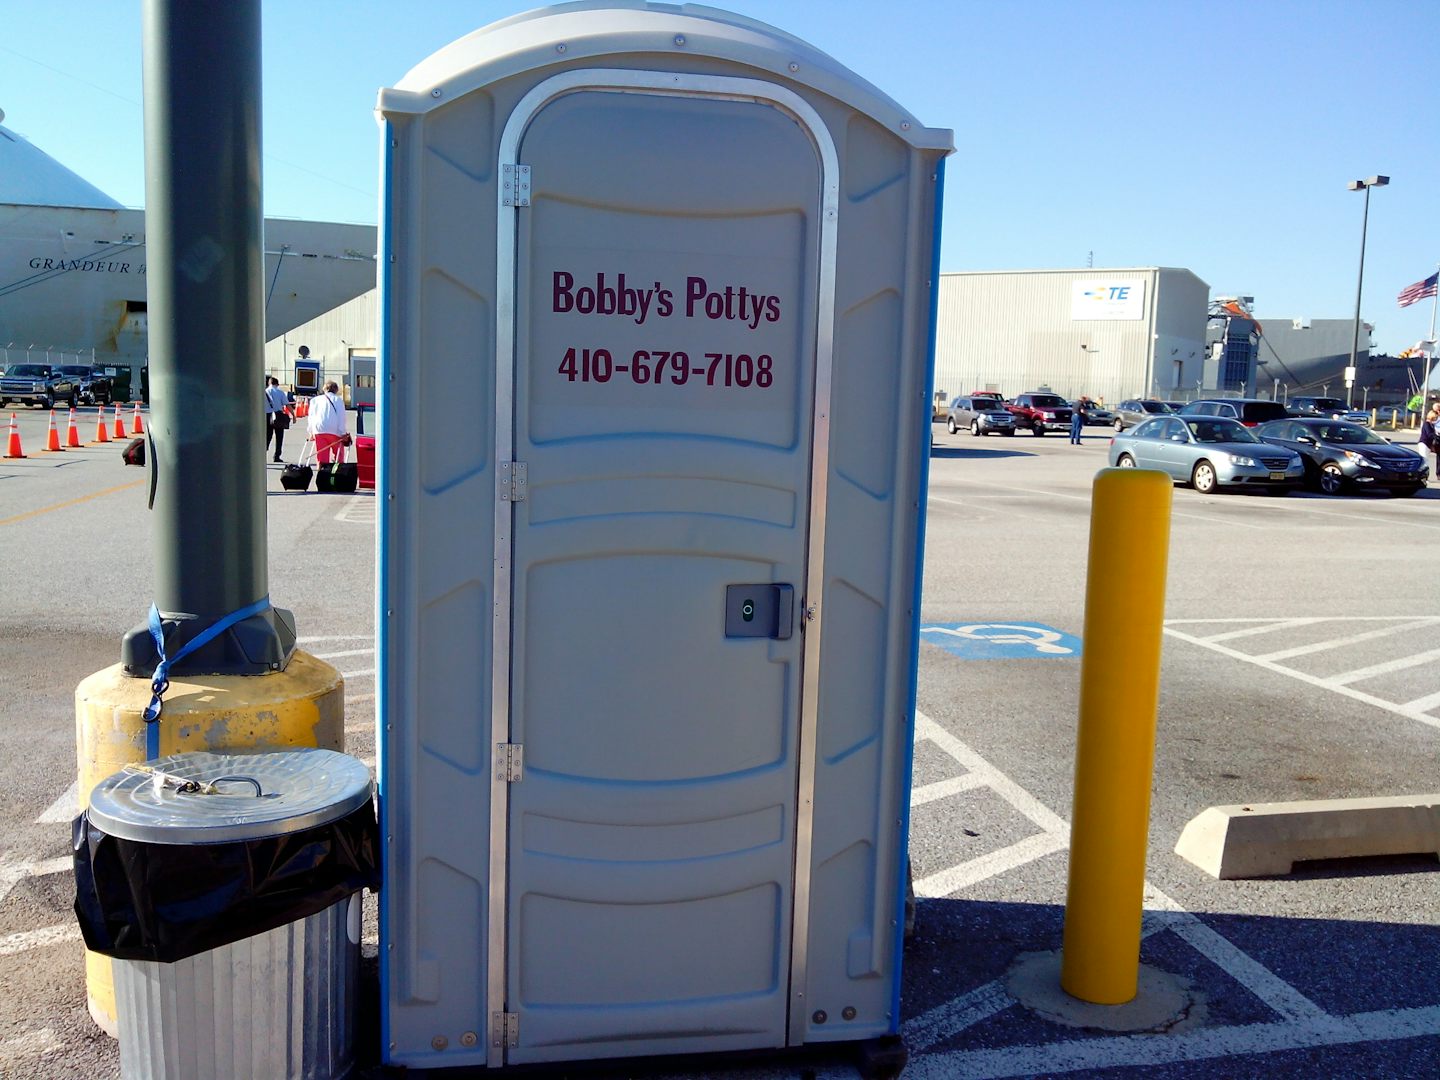 The one public restroom at the terminal